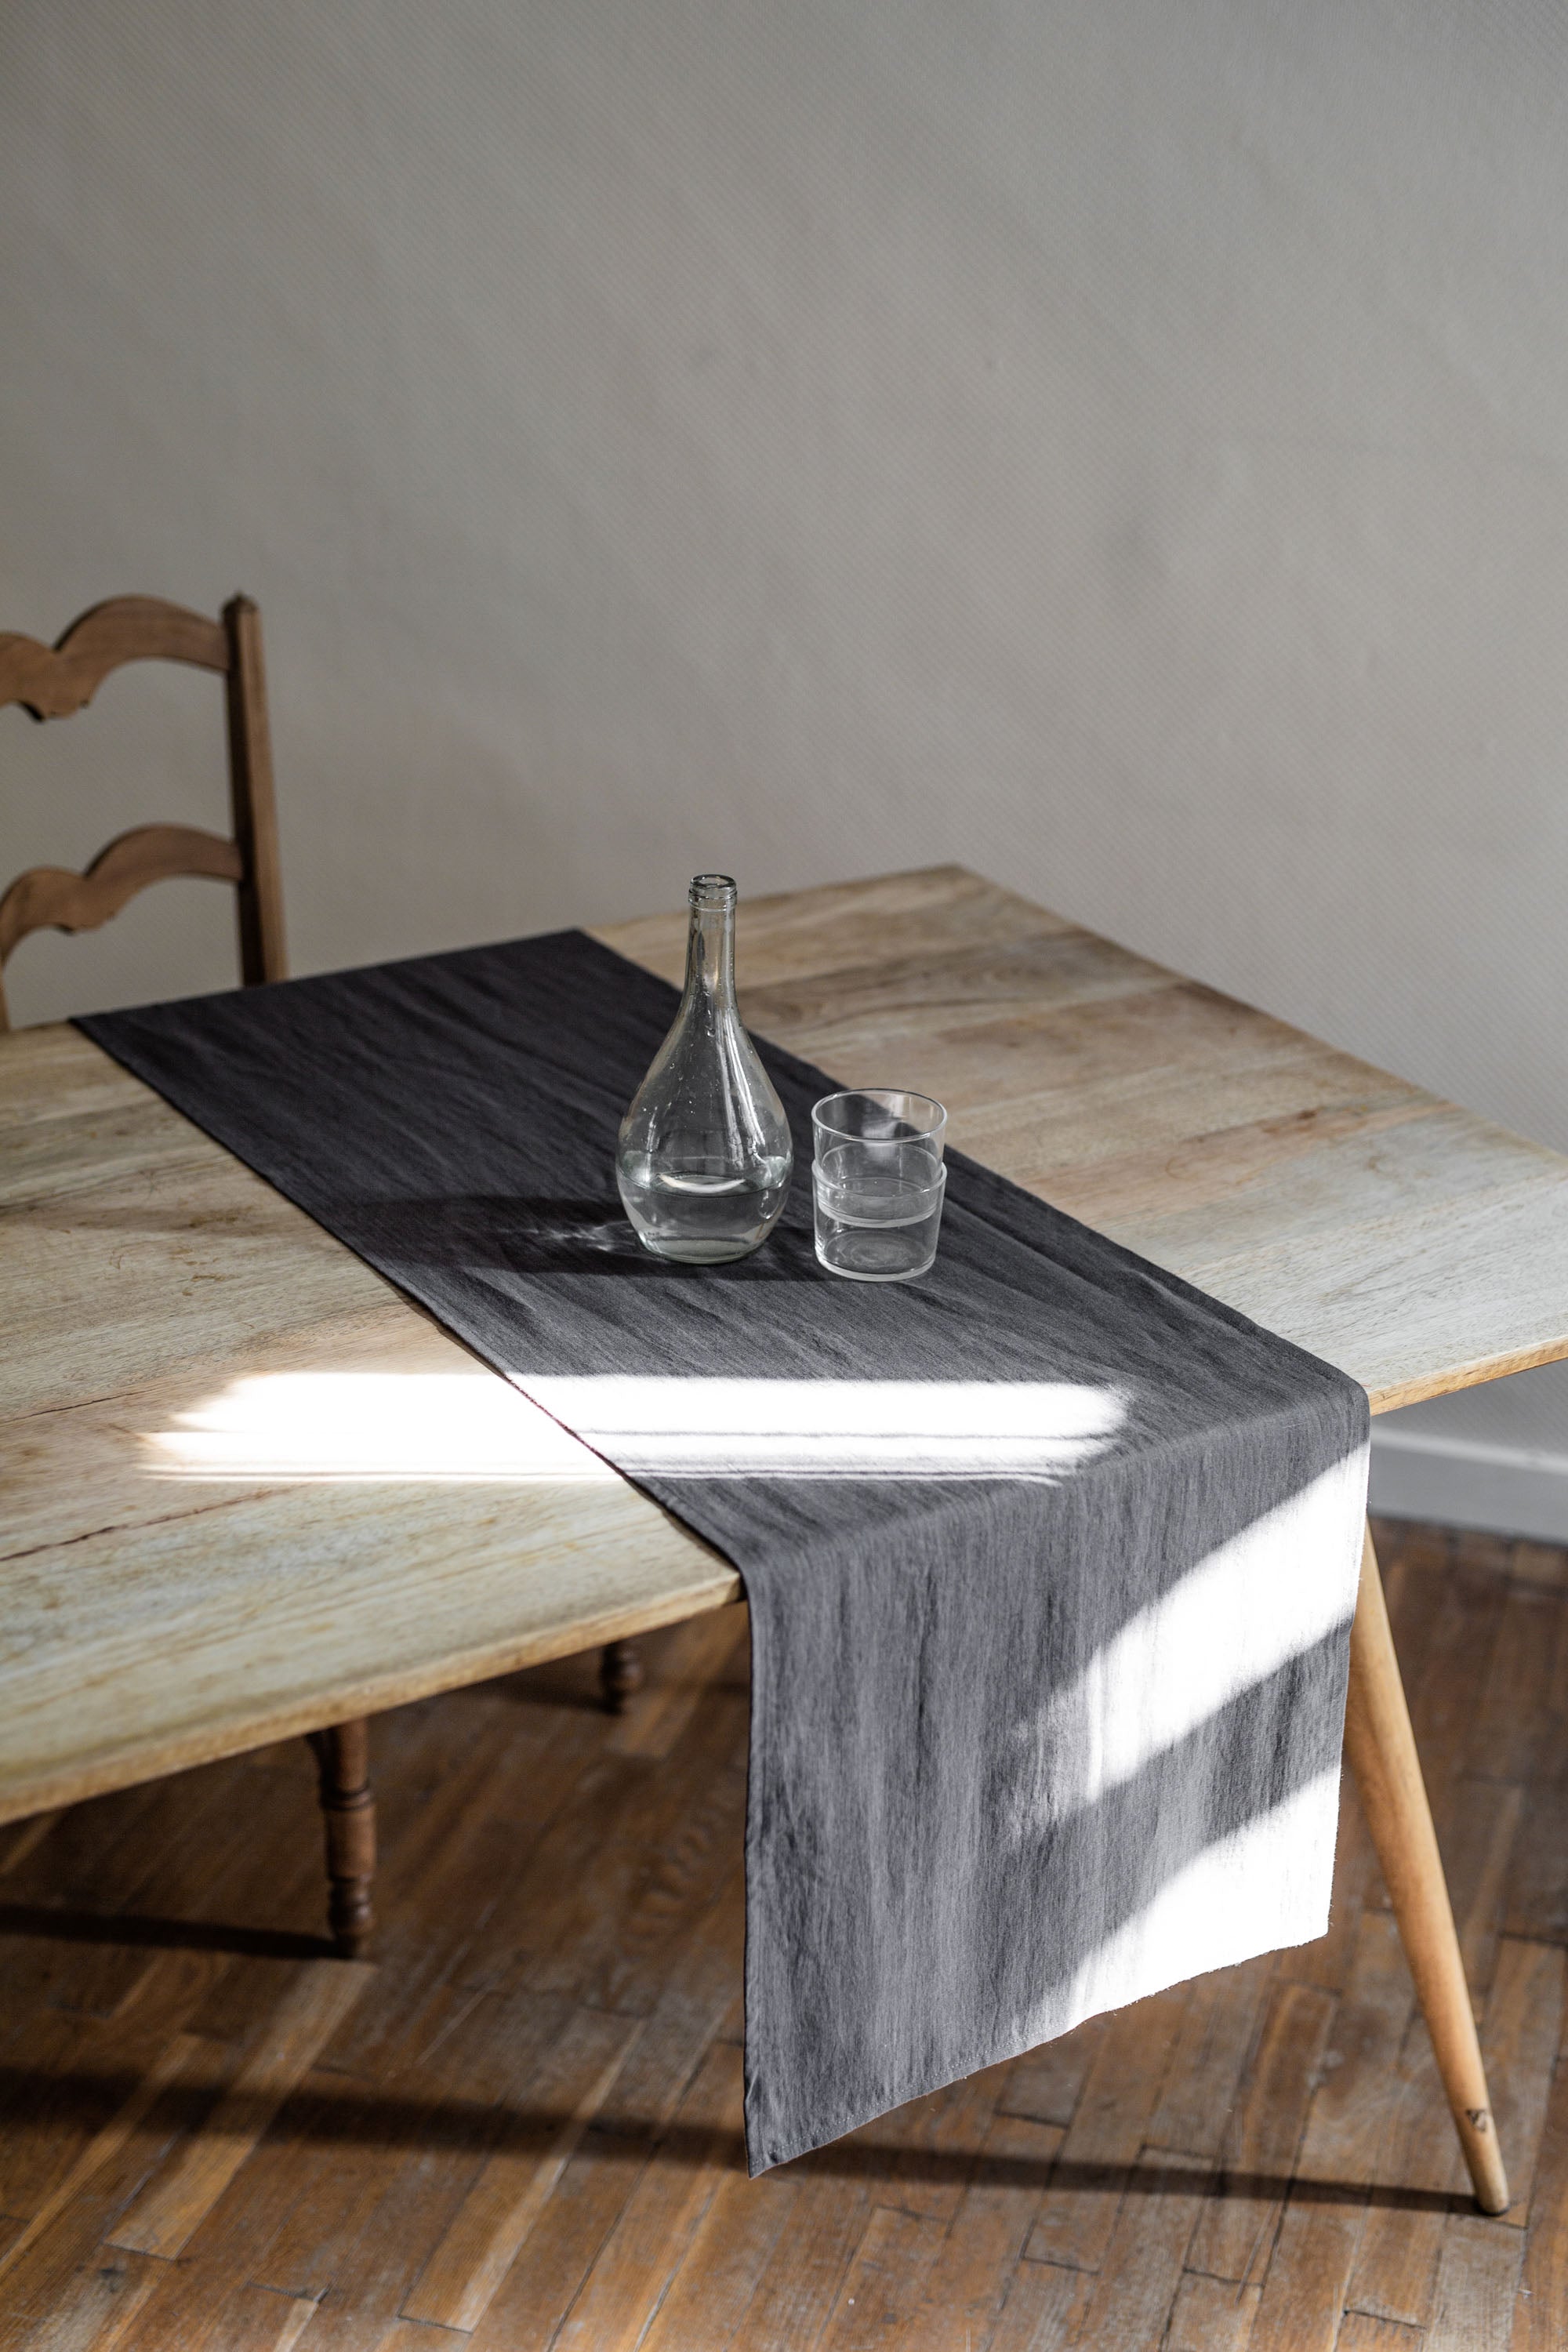 Rustic Dinner Table With Charcoal Linen Table Runner By AmourlInen